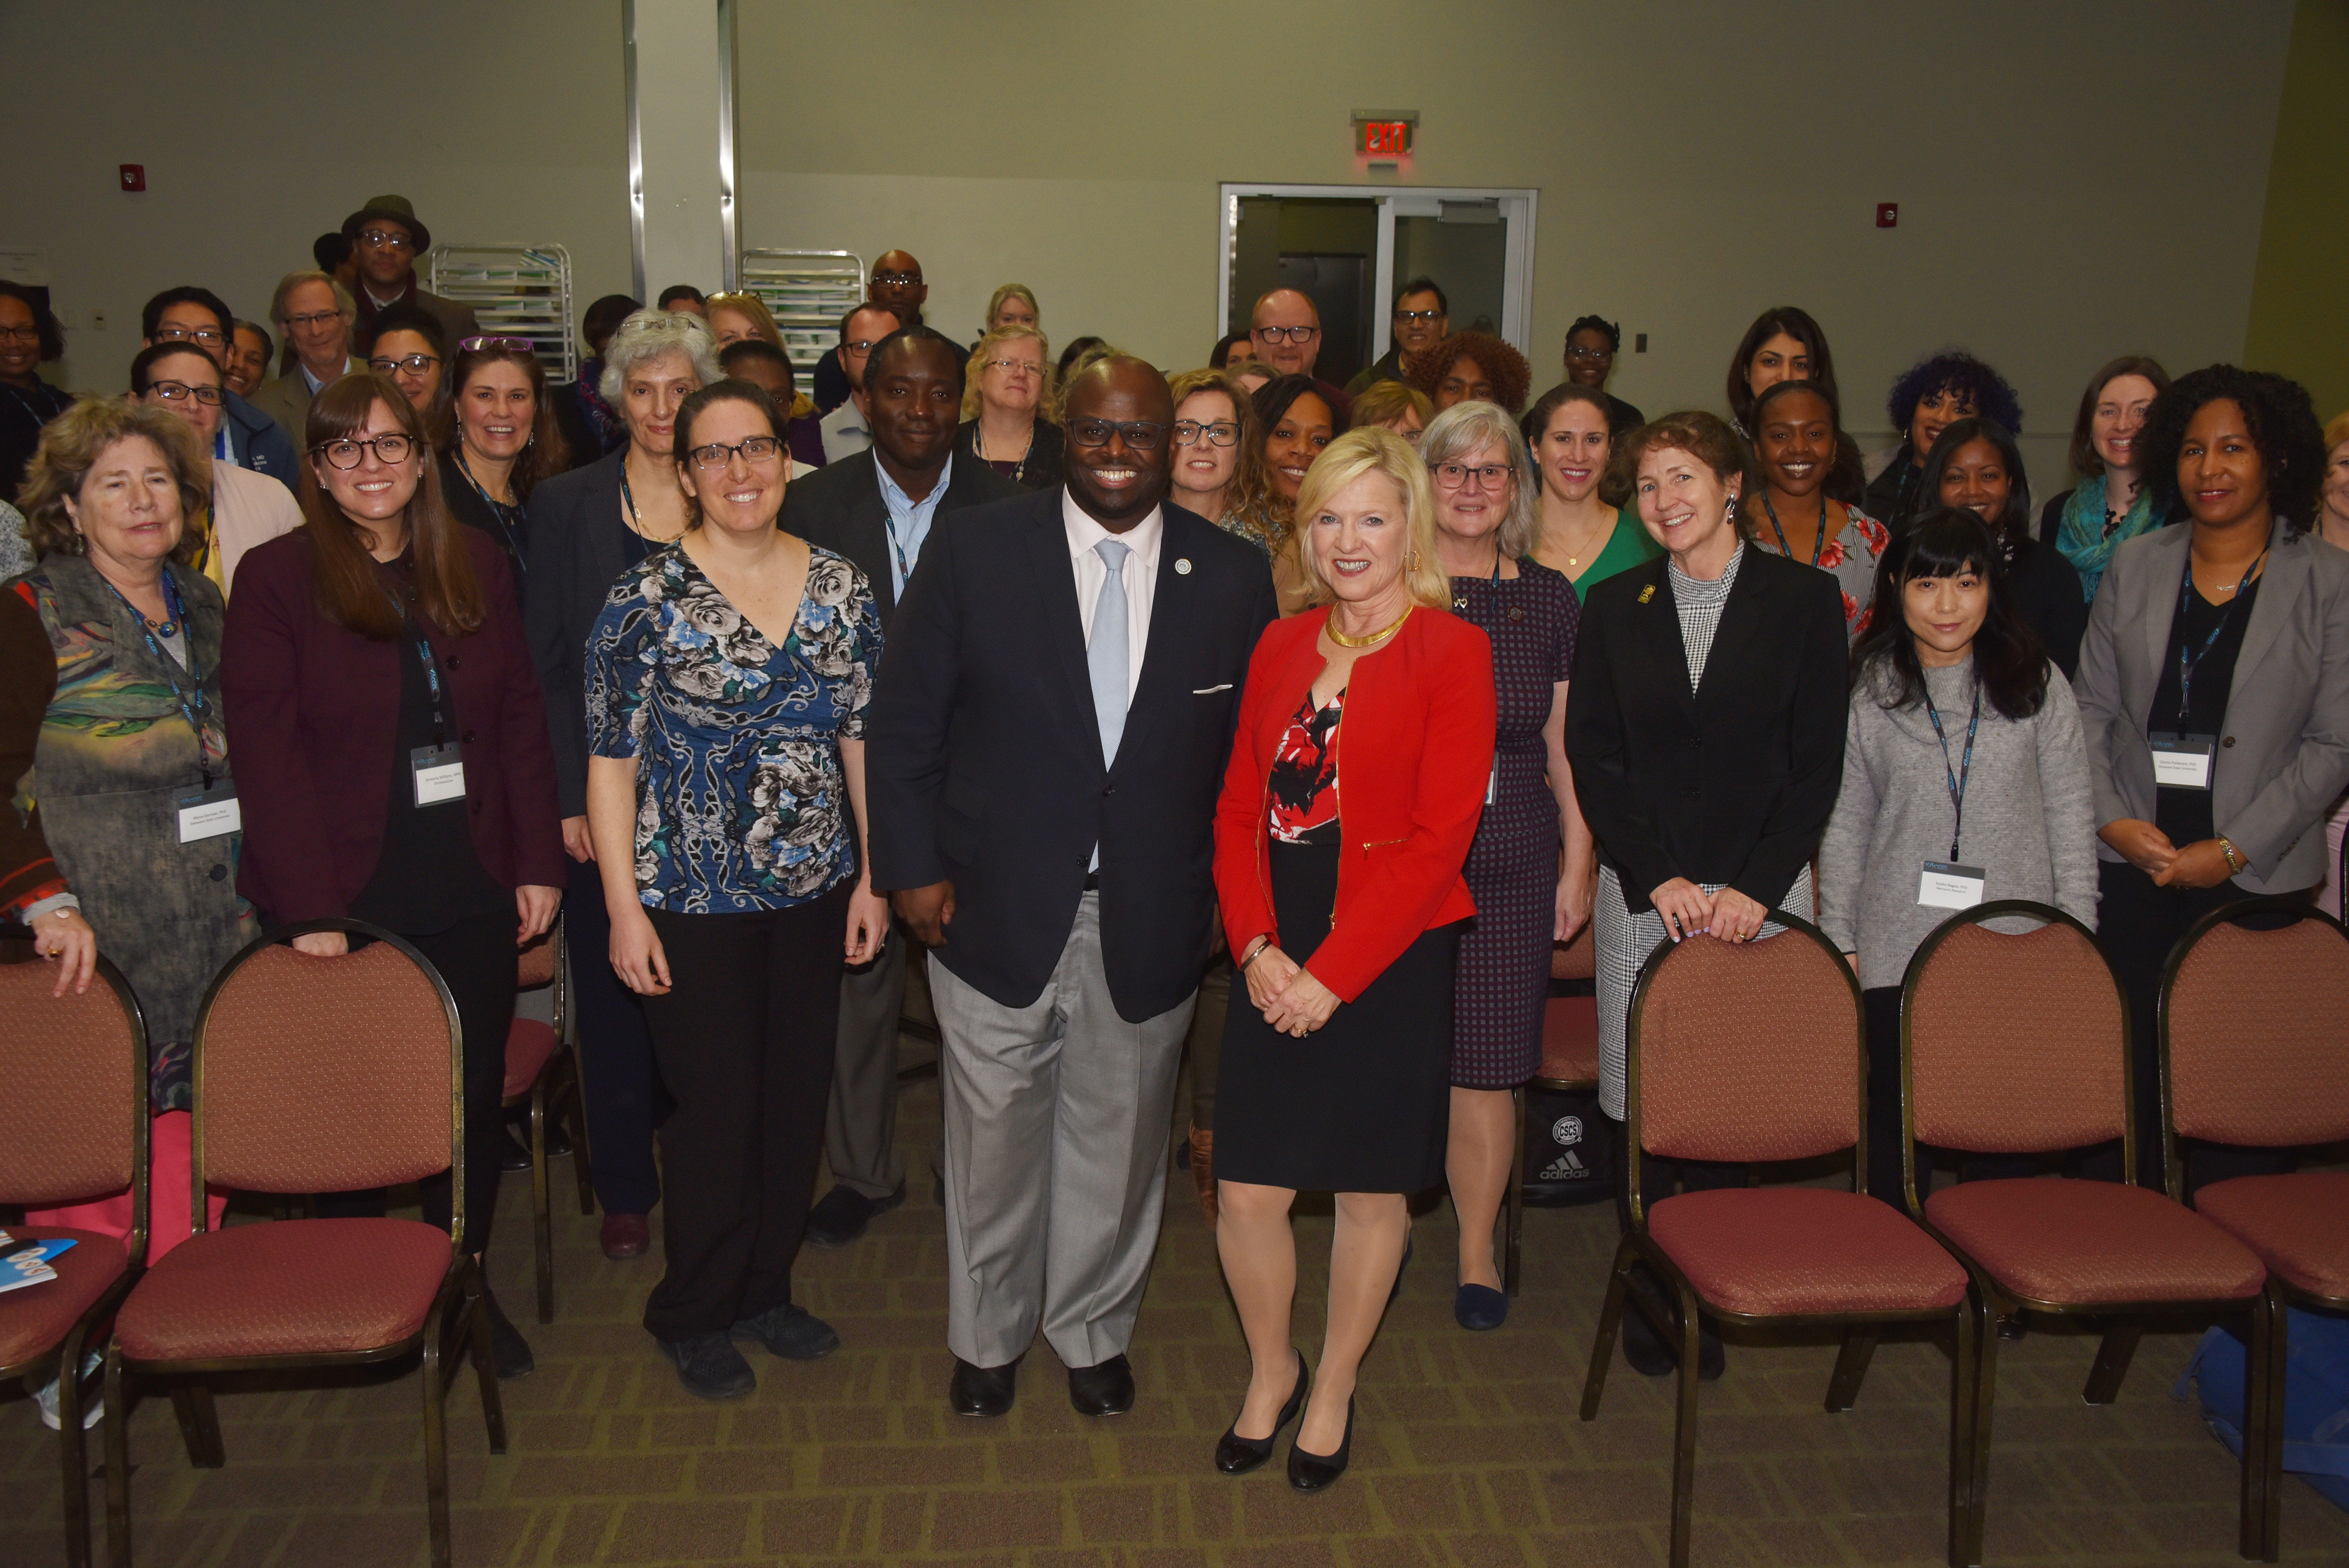 University President Tony Allen (center) and keynote speaker Del. Lt. Gov. Bethany Hall-Long join the other ACCEL Behavioral and Mental Health Retreat participants for a photo.